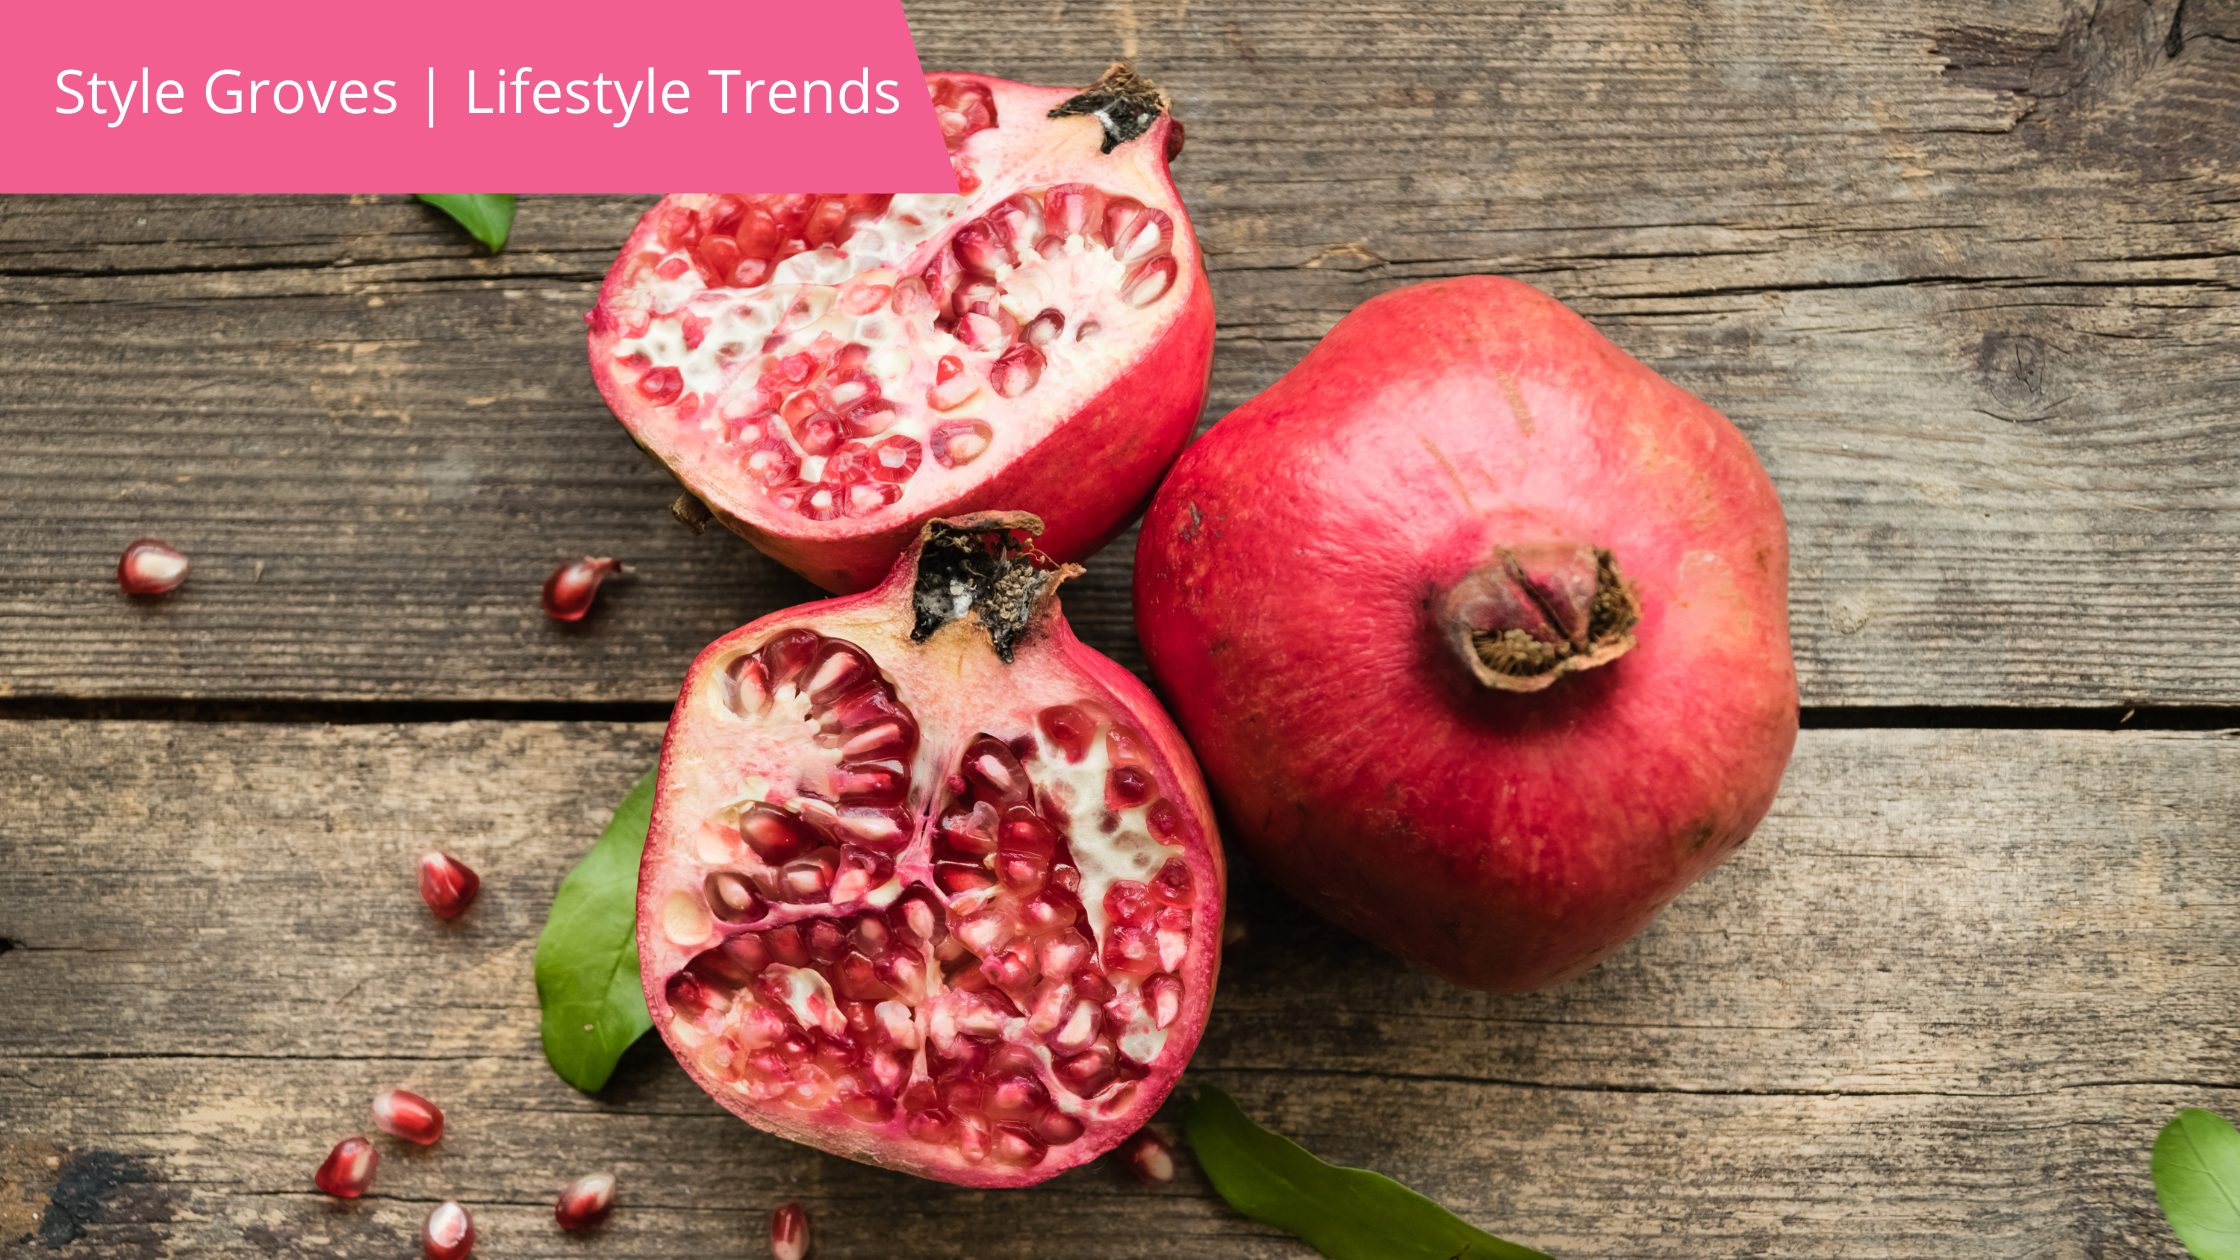 Pomegranate Benefits for Skin, Hair, and Body